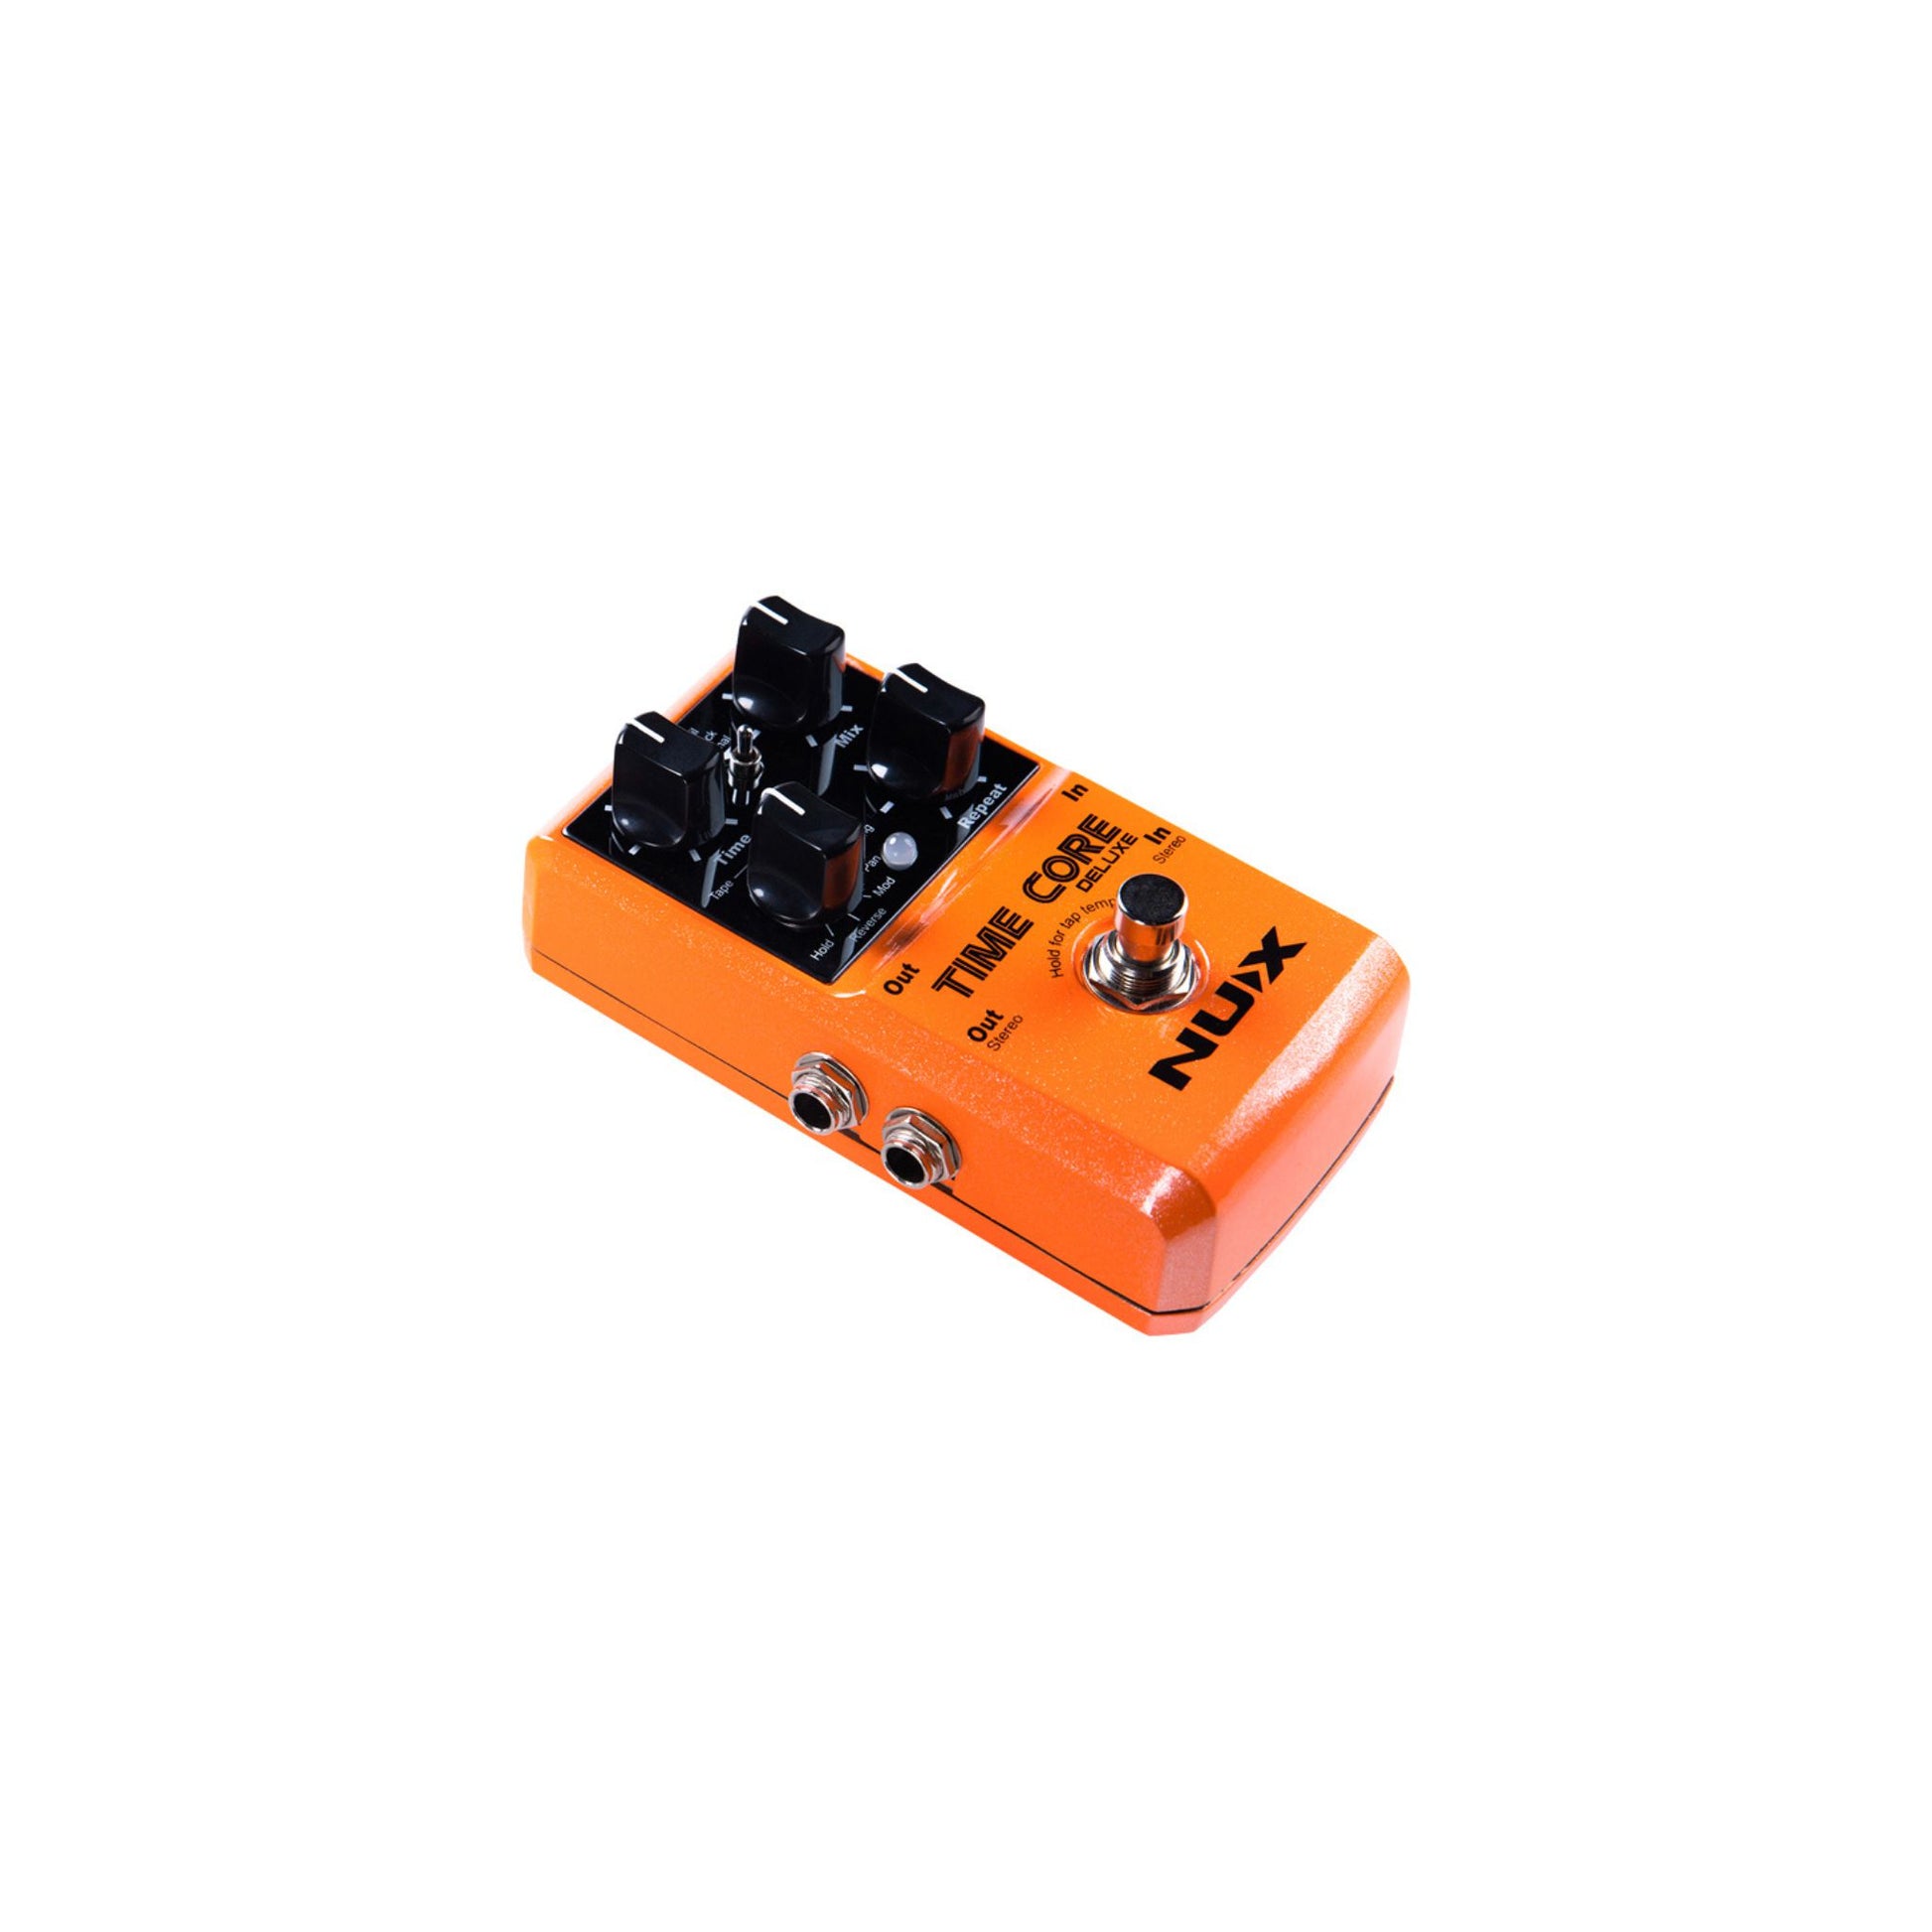 Pedal Guitar Nux Time Core Deluxe Delay - Việt Music